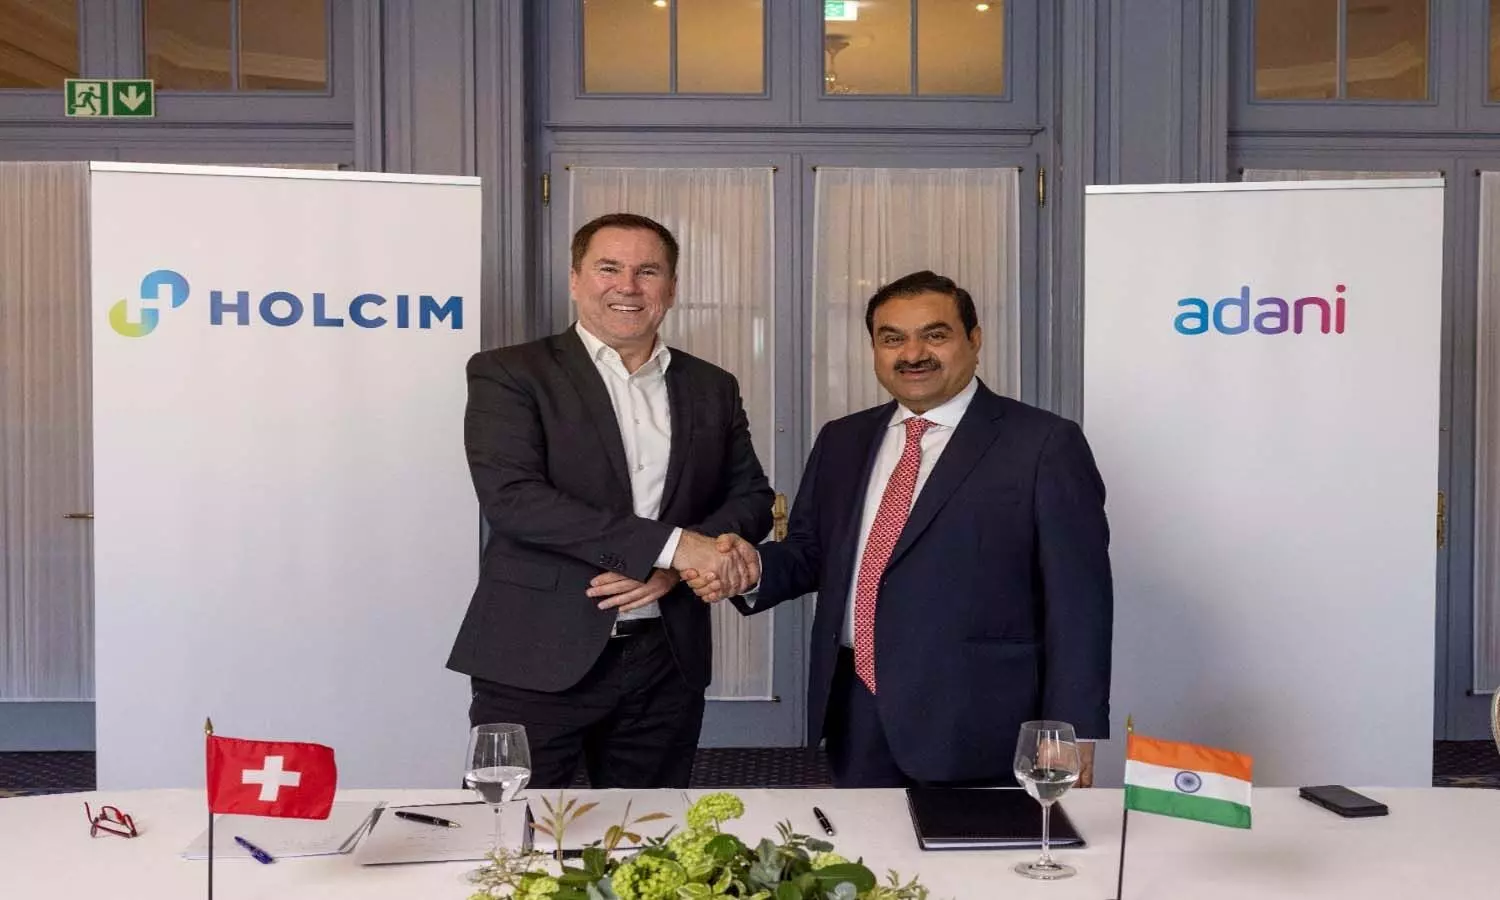 Adani Group to buy Ambuja Cements and Holcims stake in ACC Ltd.